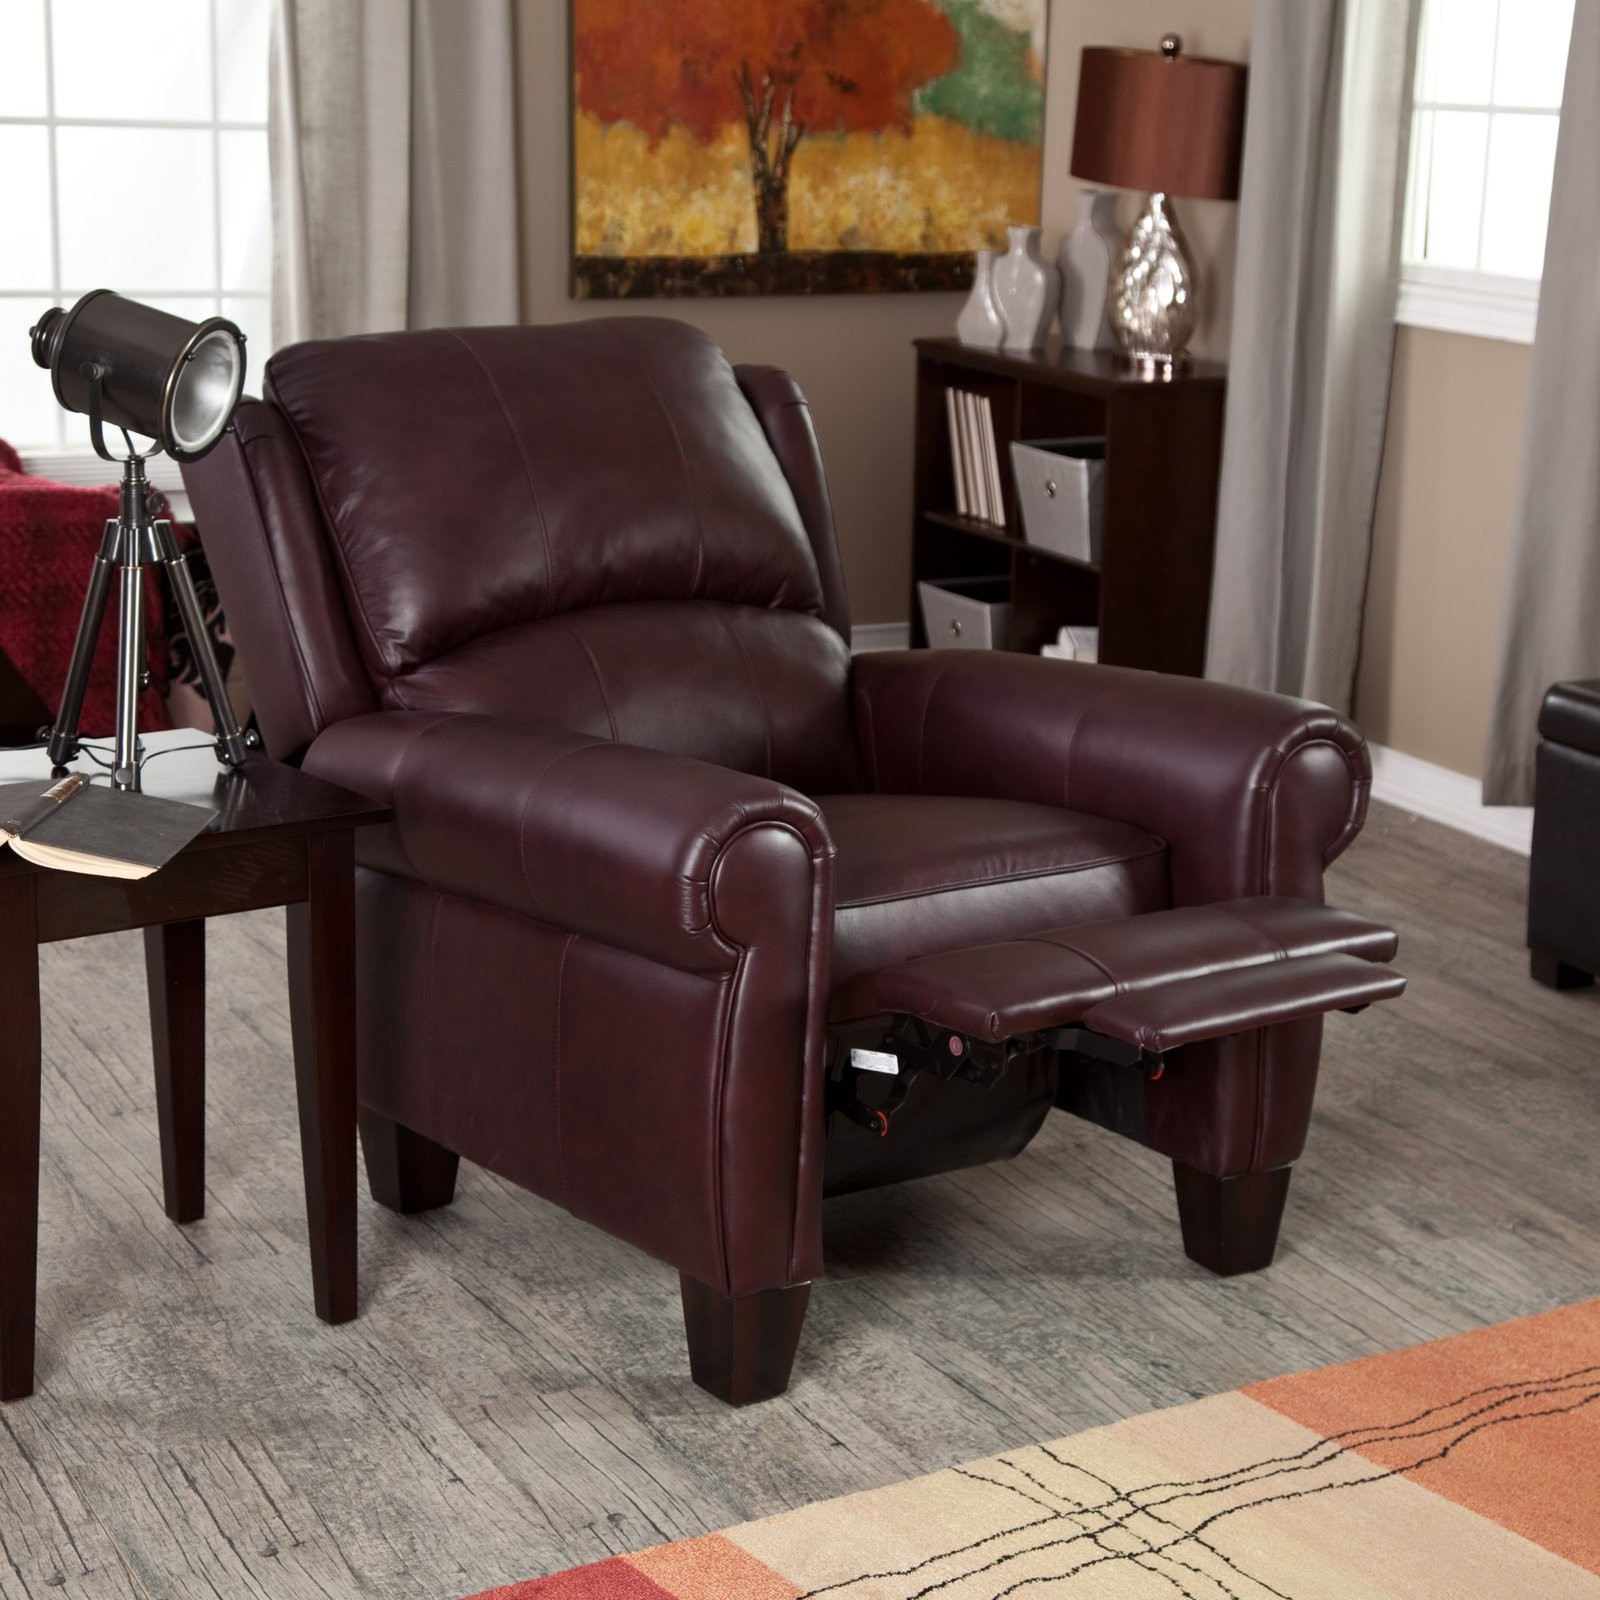 Wingback Living Room Chairs
 Leather Recliner Chair Home Burgundy Push Back Wingback